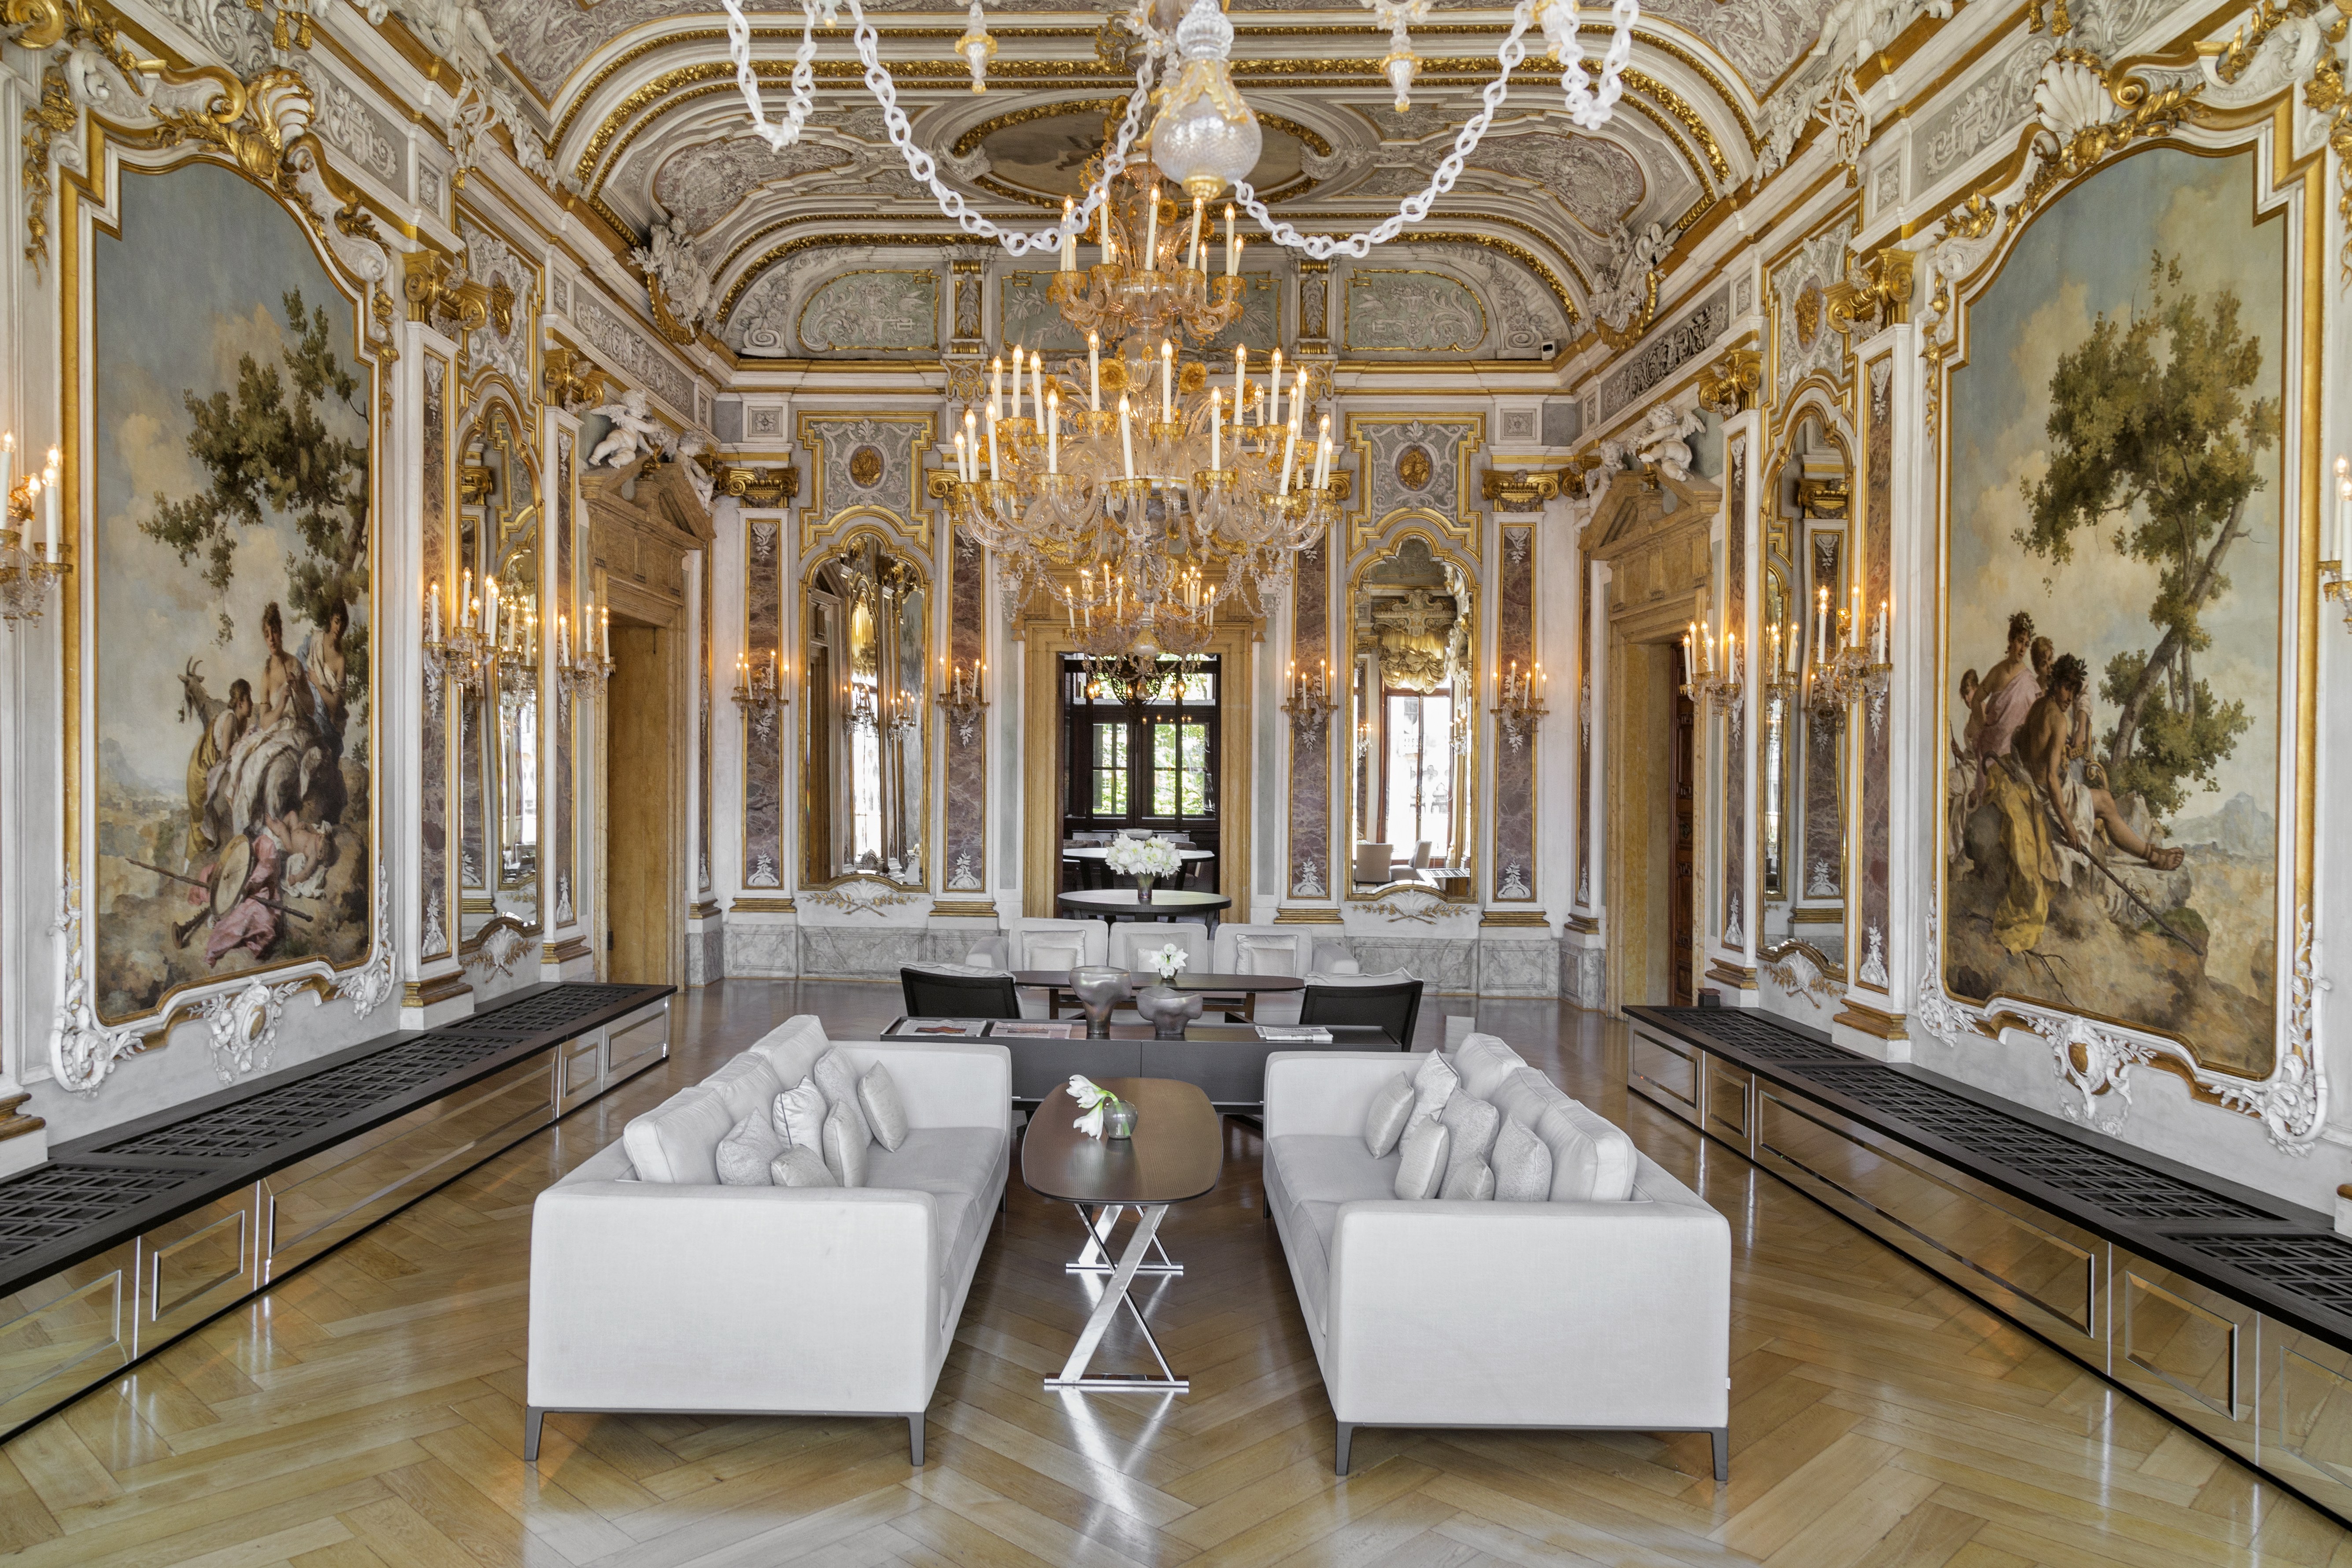 Aman VeniceThe Aman brand gets downright opulent at this 24-room hotel, set inside the 16th-century Palazzo Papadopoli on the Grand Canal in Venice. Inside is a study in contrasts by designer Jean-Michel Gathy, with Aman’s signature minimalist furnishings paired with silk wall coverings, gilt rococo reliefs, and historic frescoes by Renaissance master Giovanni Battista Tiepolo. Outside, a private garden and hidden jetty keep it paparazzi-proof, no doubt part of the appeal for George and Amal Clooney, who tied the knot here in 2014. From $1,068/night; aman.com